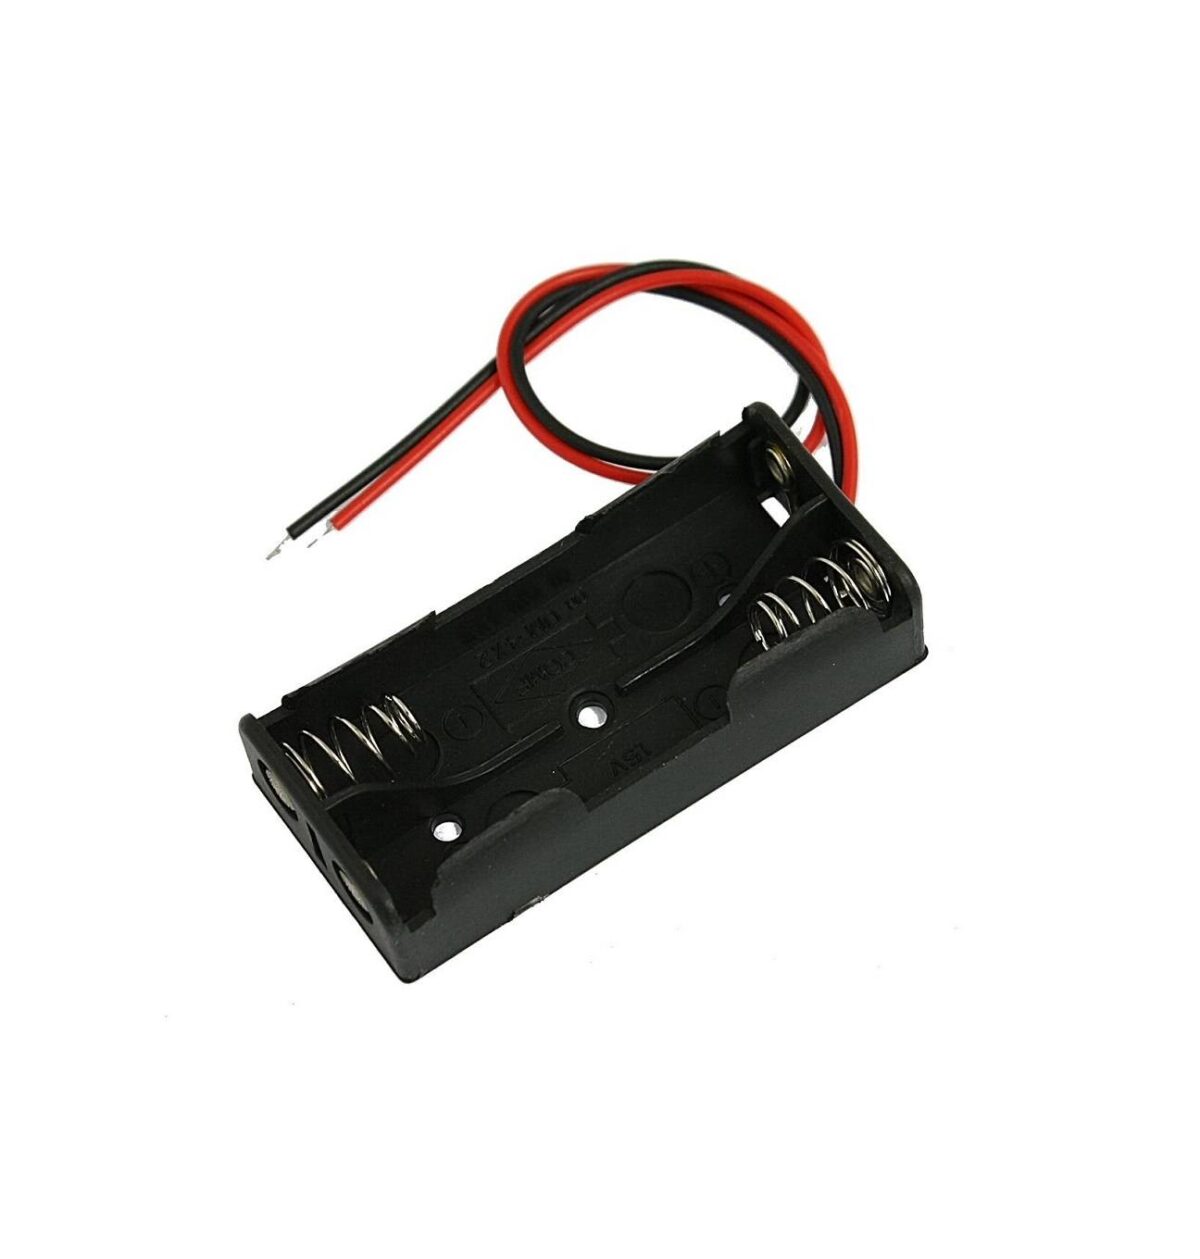 Battery Holder-2xAAA-Black in Color